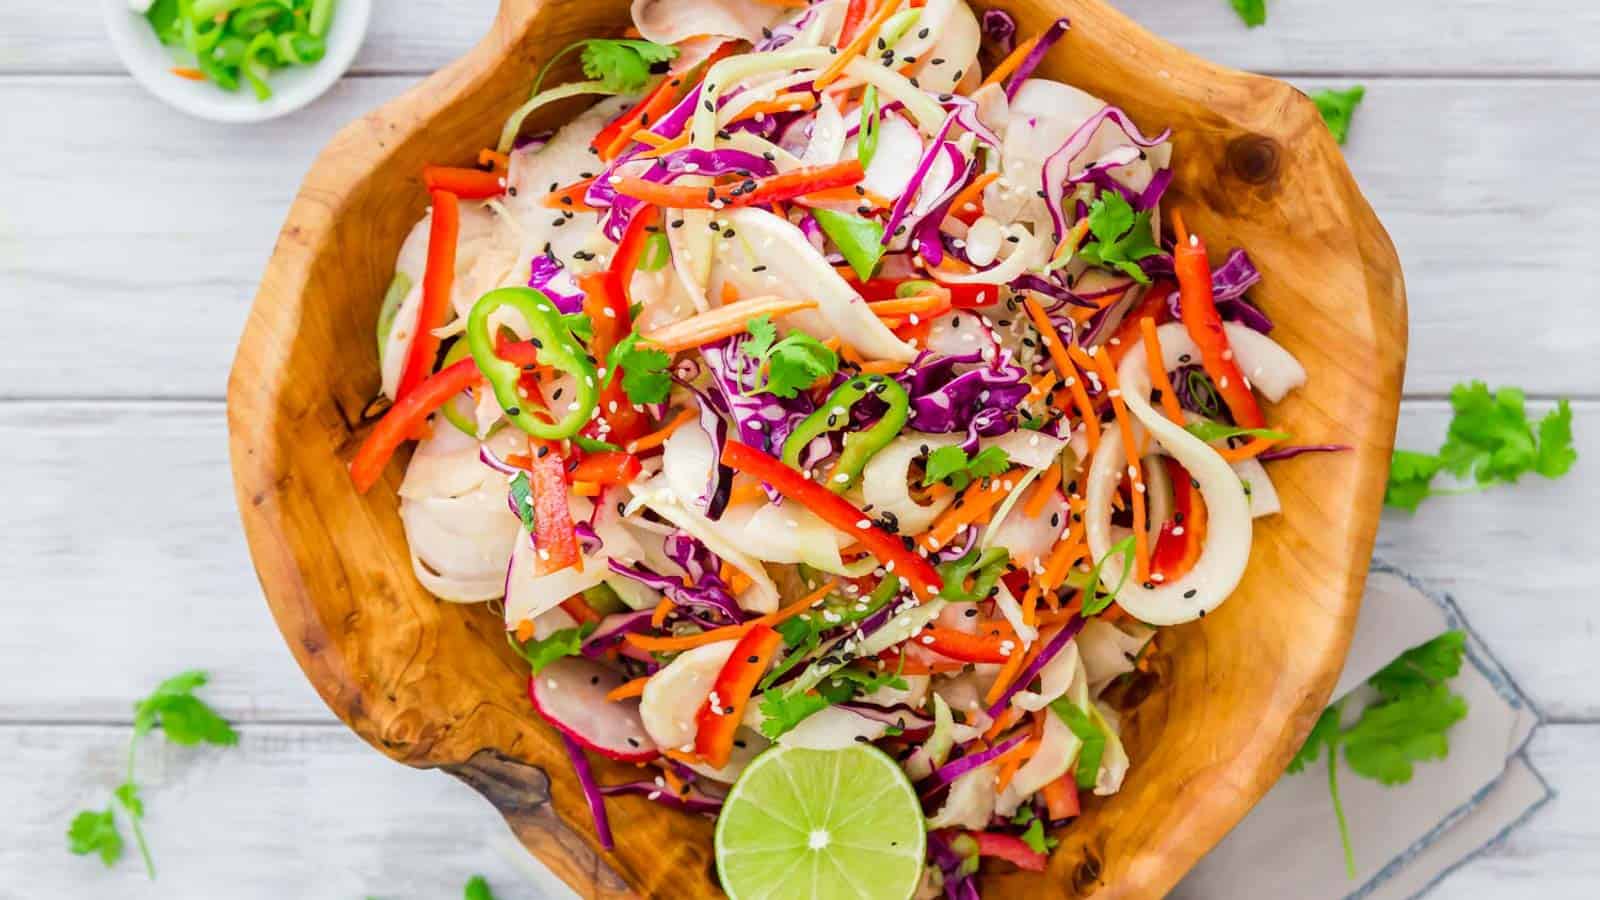 Thai kohlrabi noodle salad in a wooden bowl with limes.